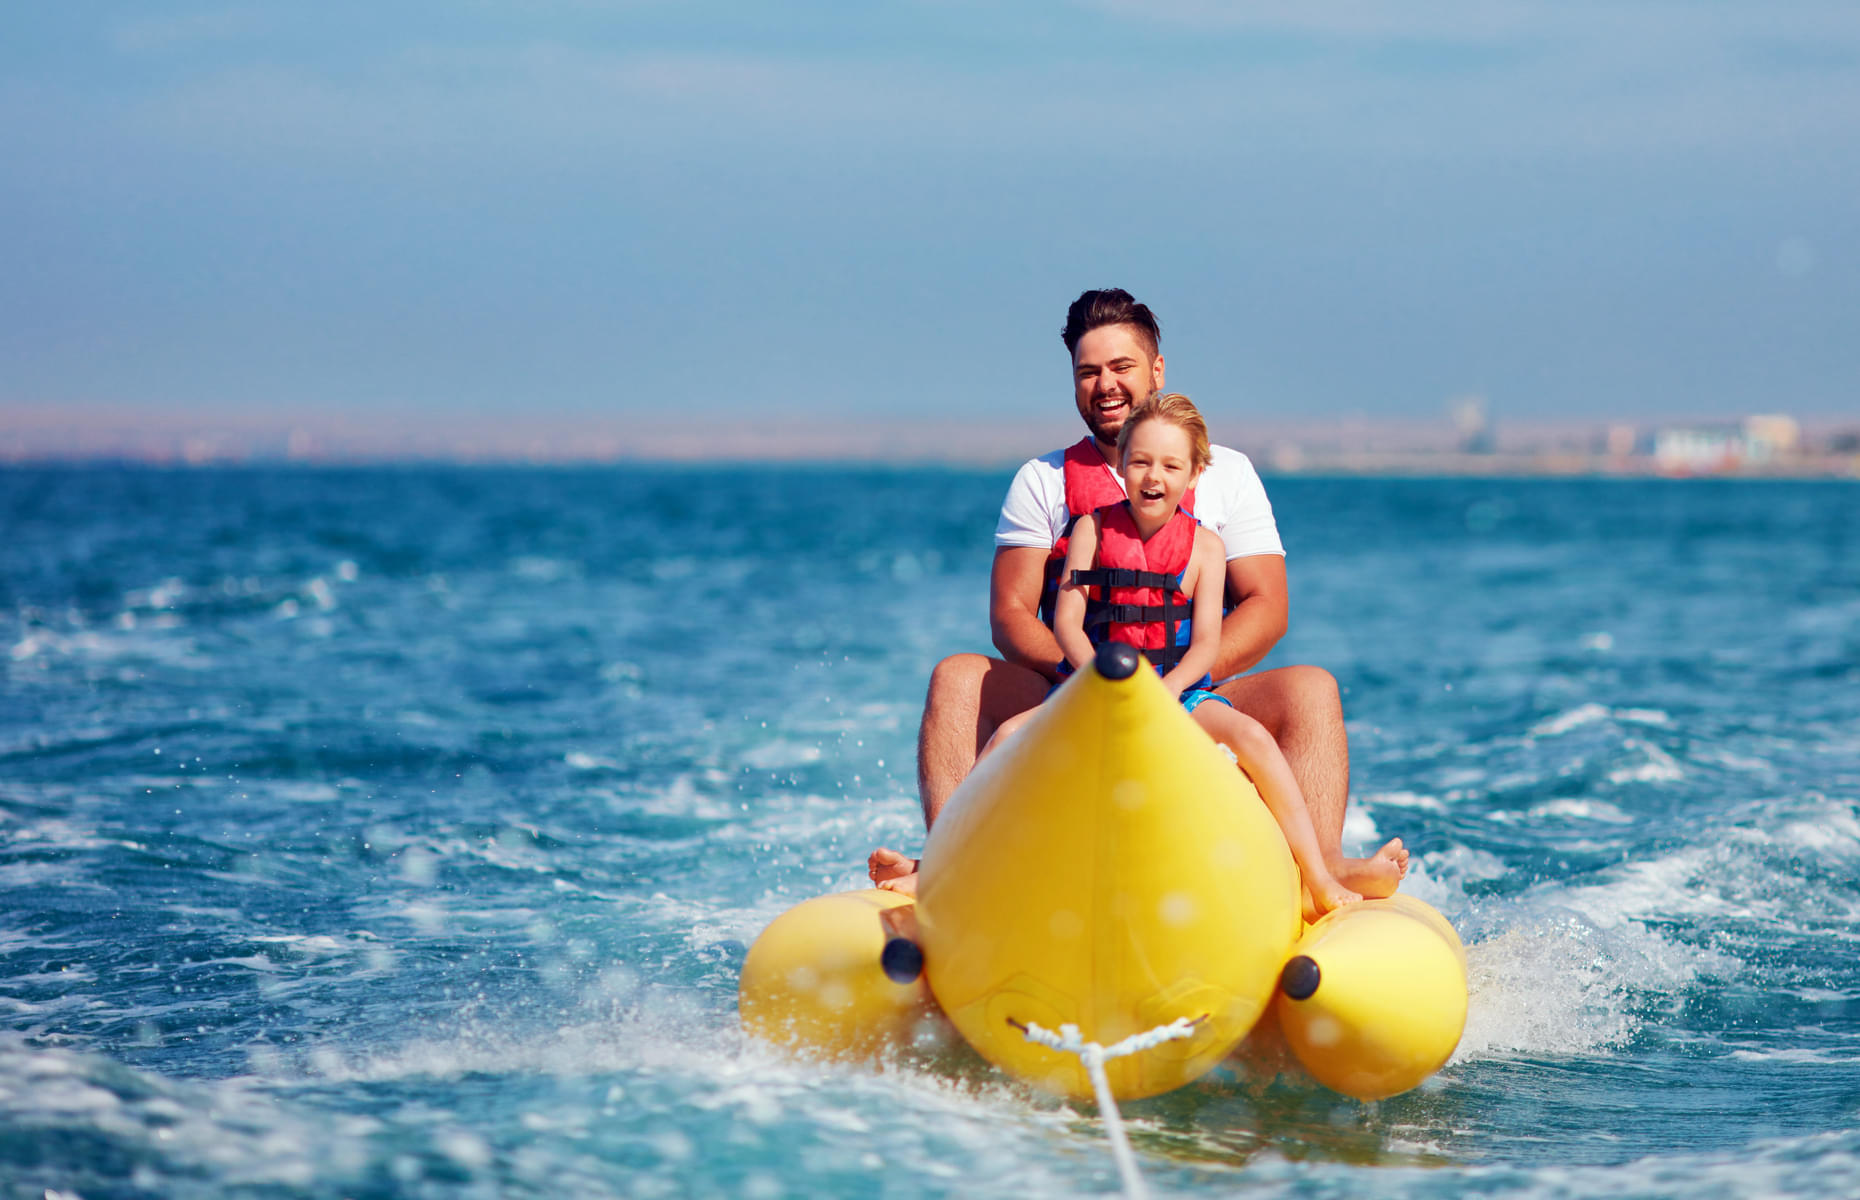 The excitement of being on an inflatable banana shaped boat